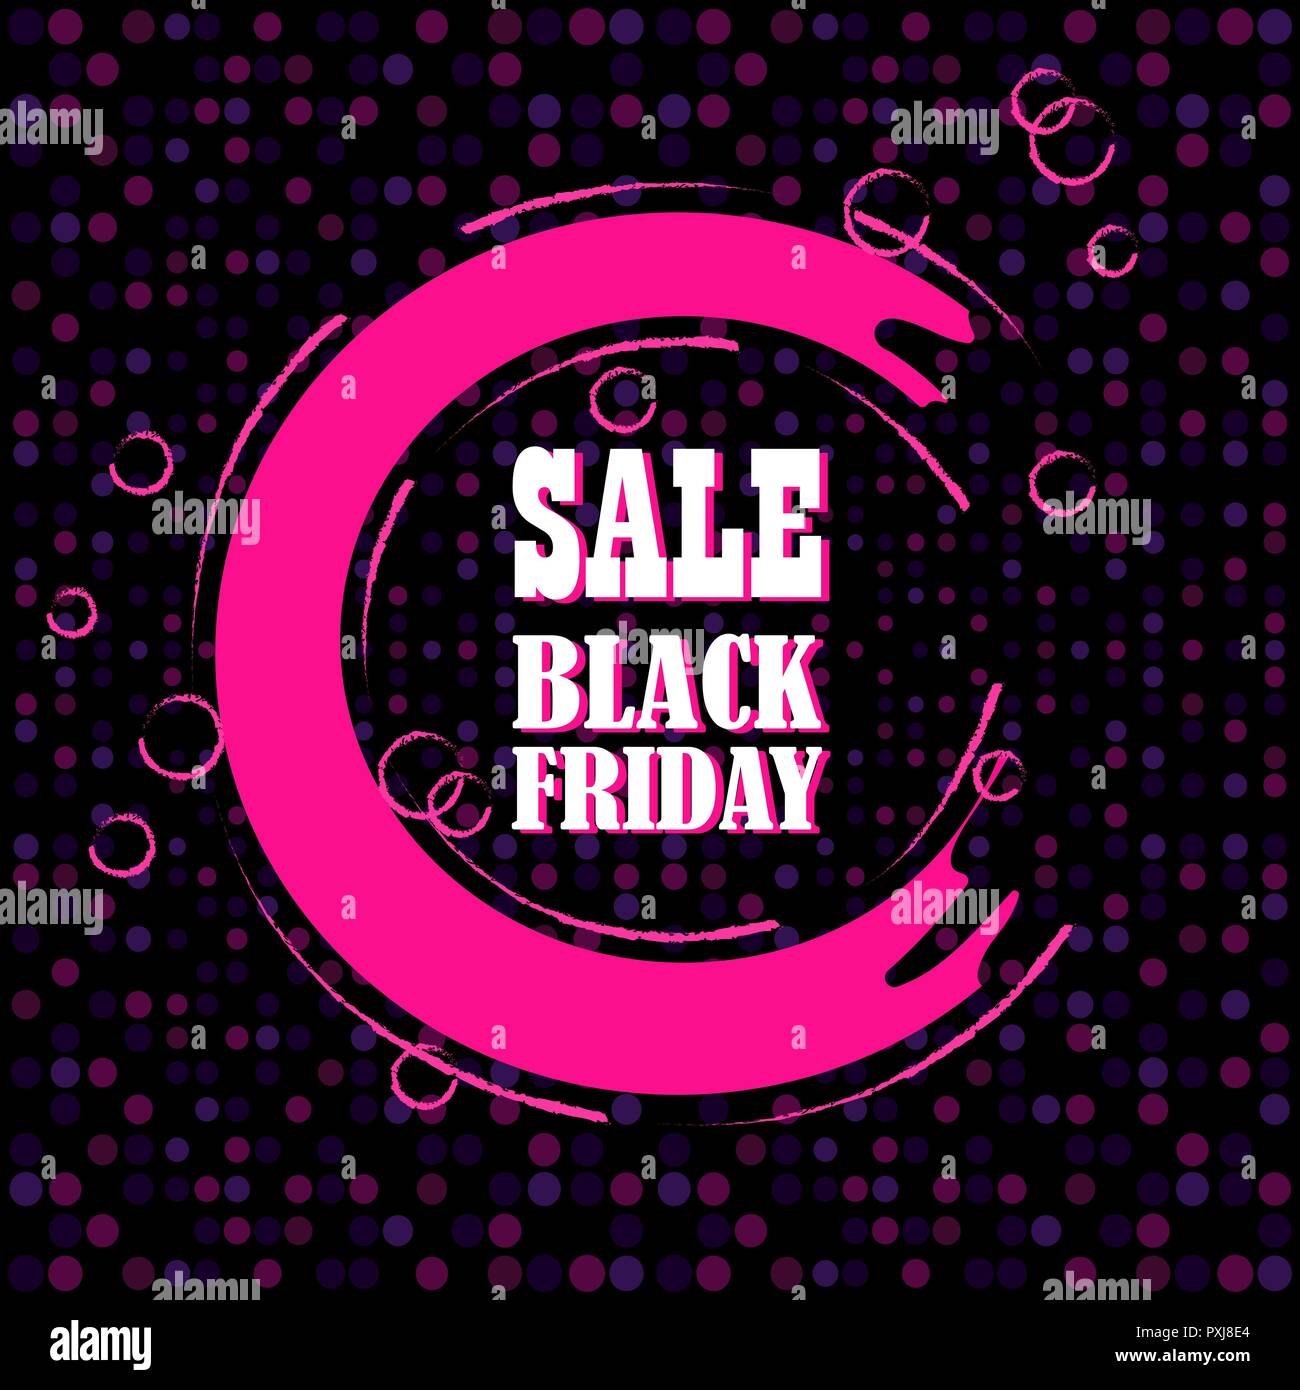 Black Friday sale colorful background. Vector illustration Stock Vector